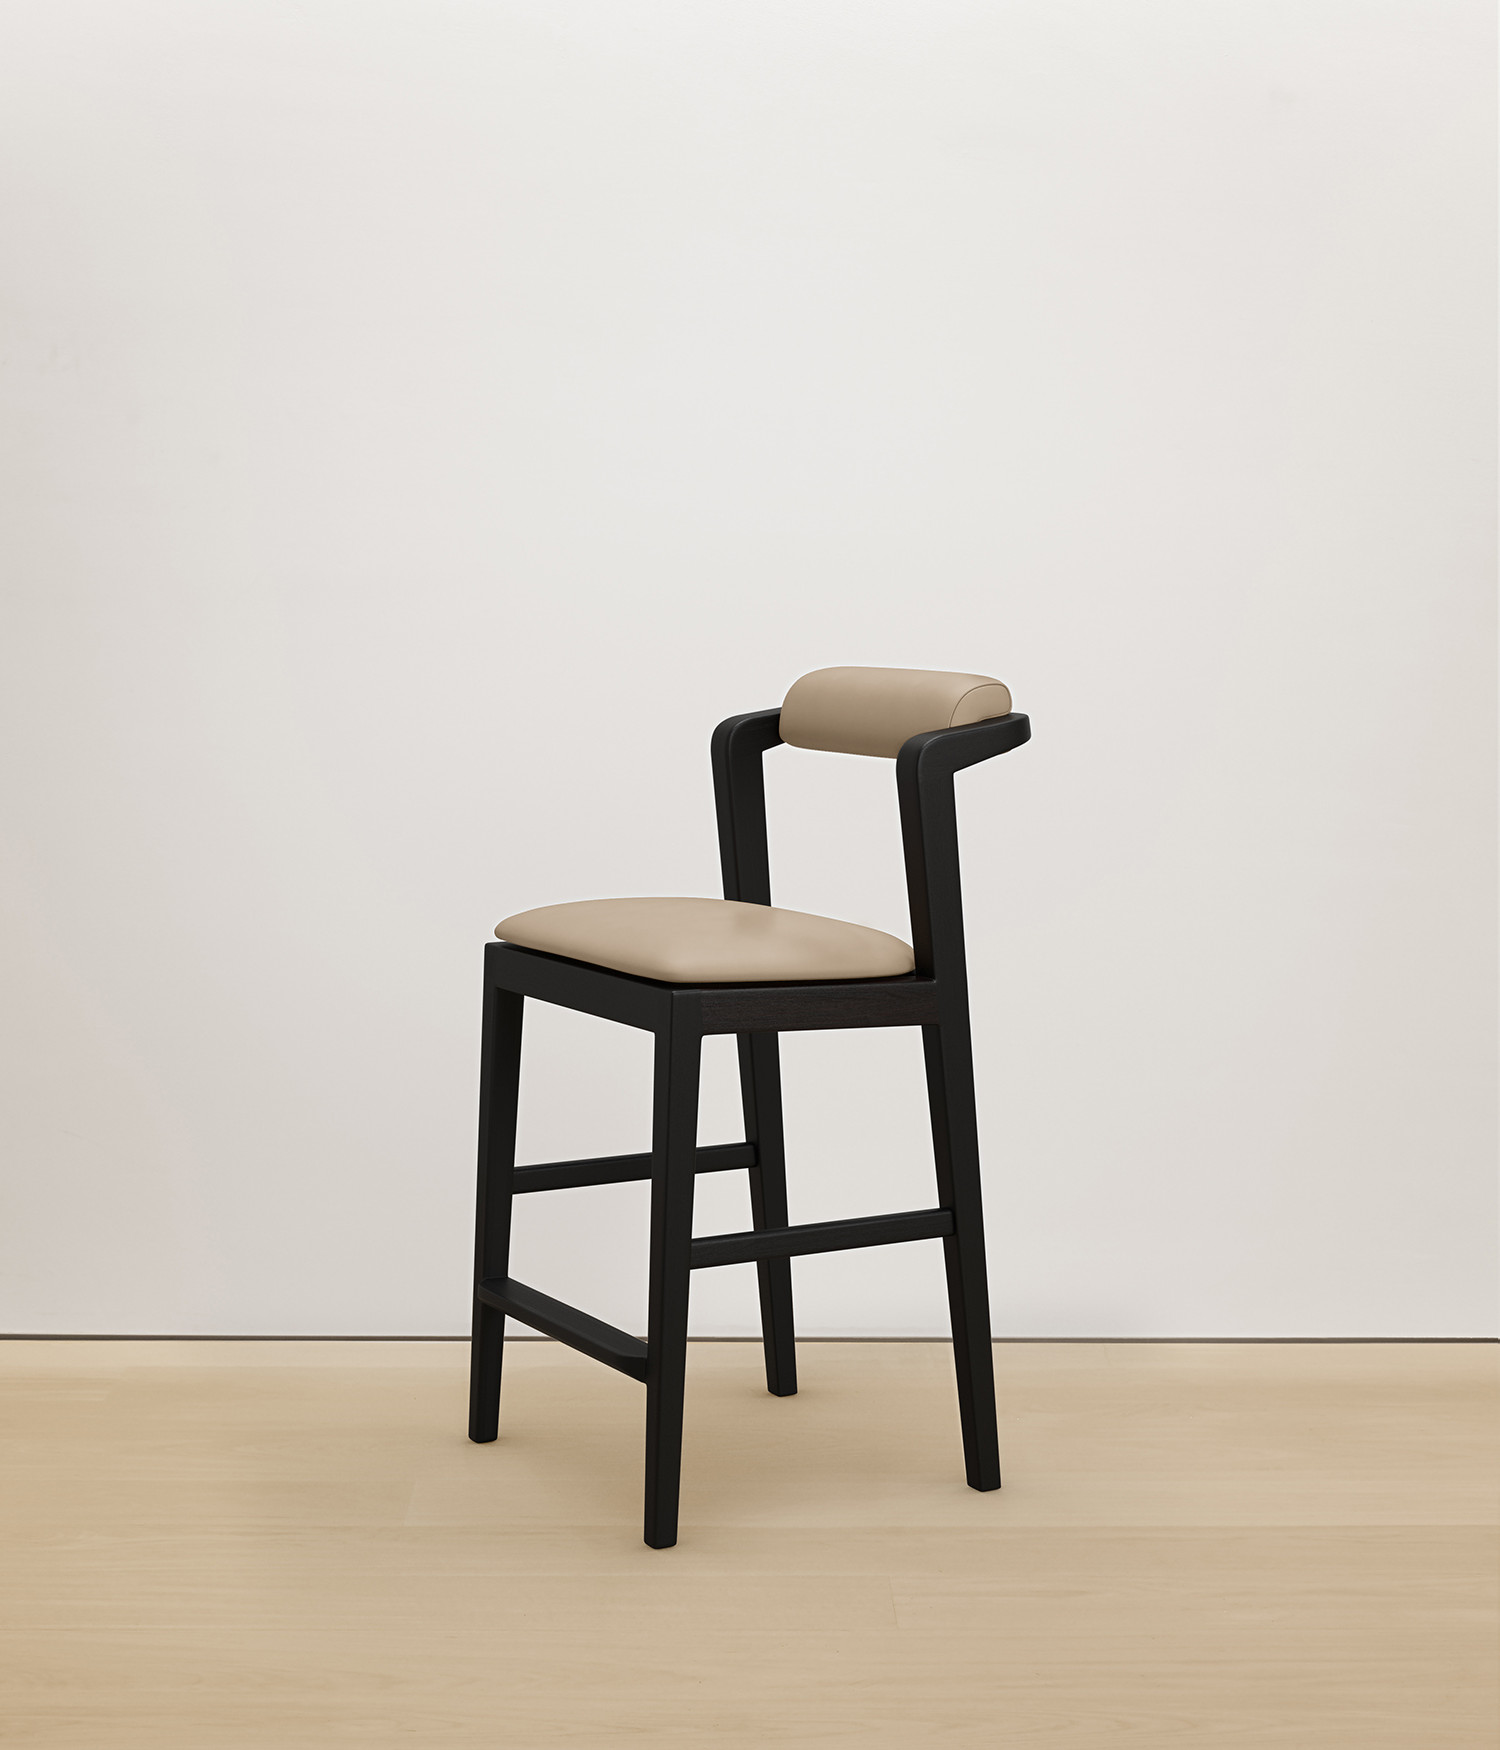  black-stained-oak stool with cream color upholstered seat